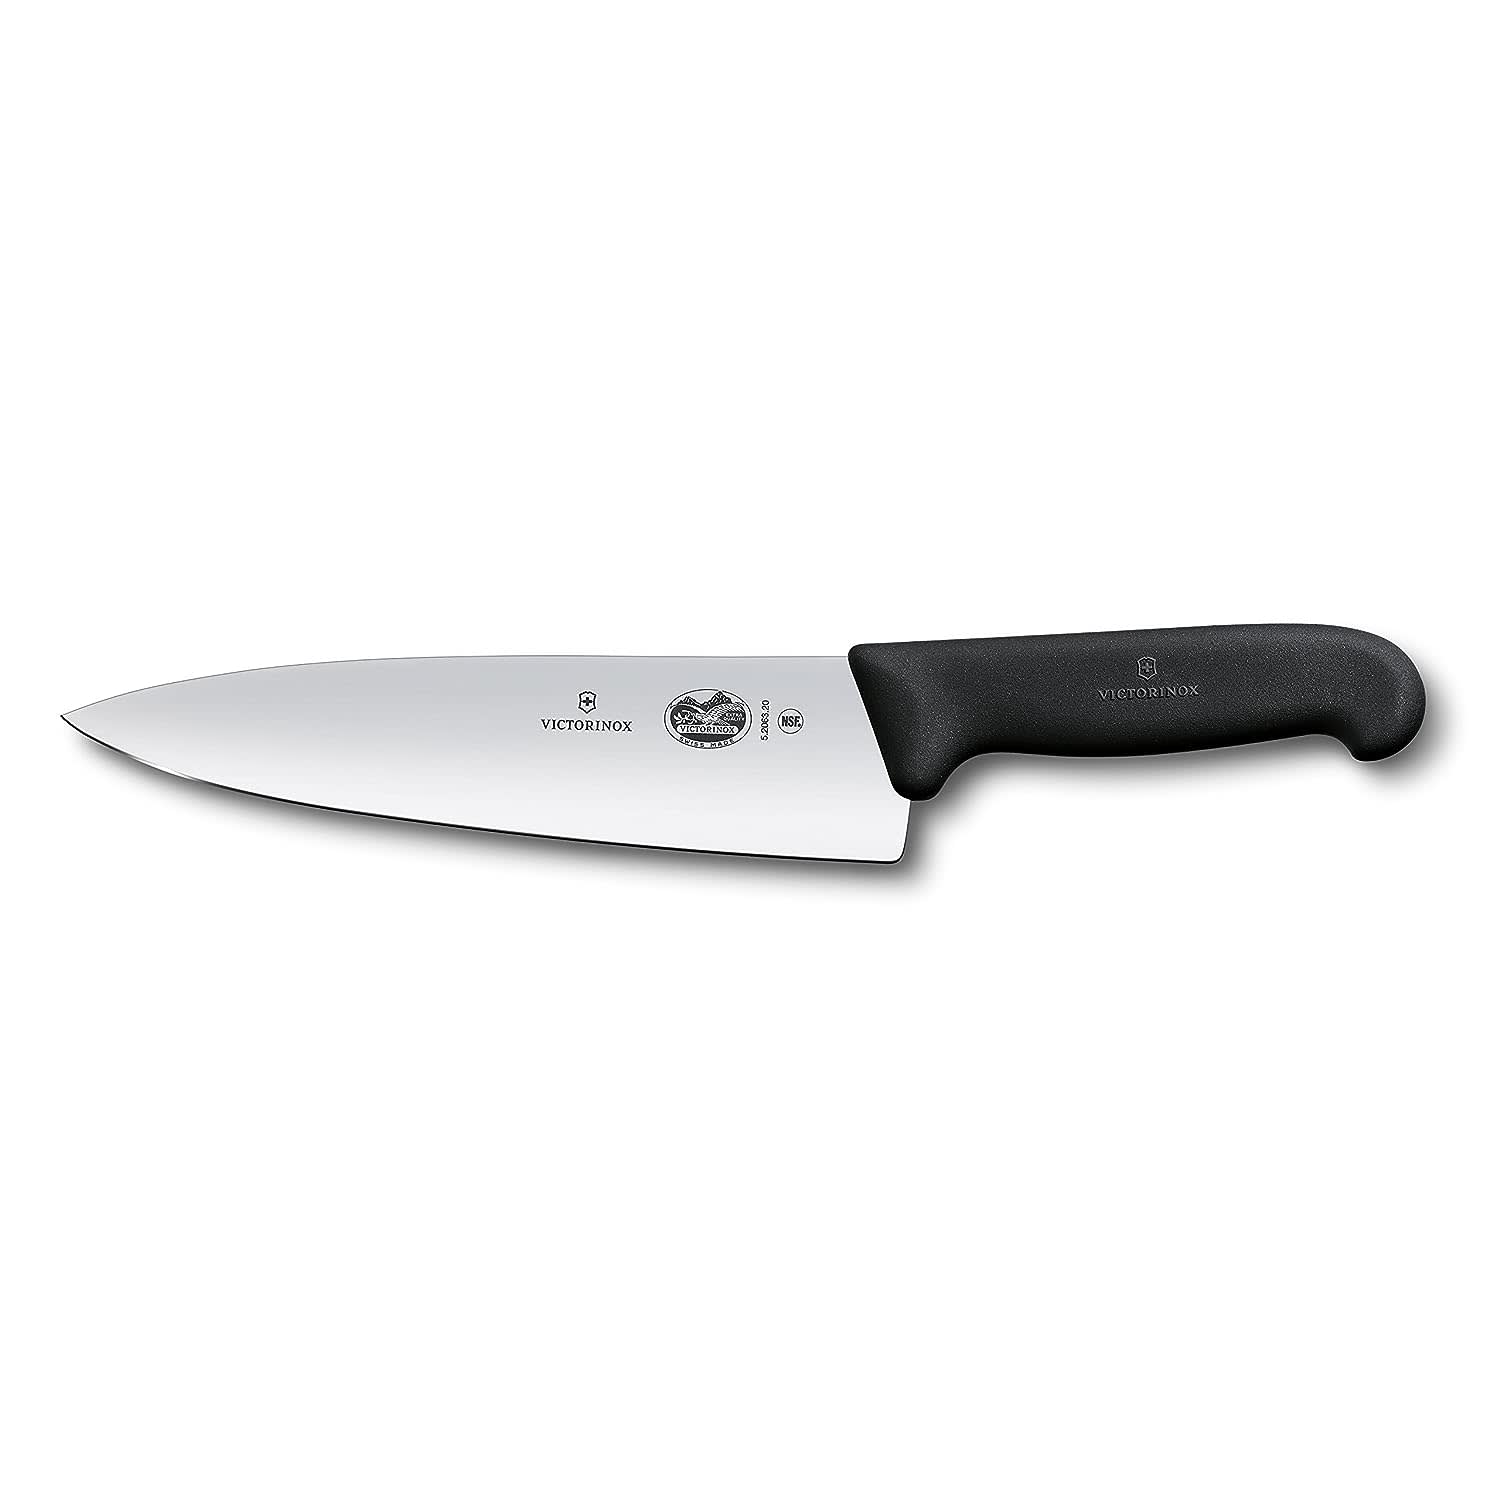 Best Chef's Knives 2023 - Forbes Vetted